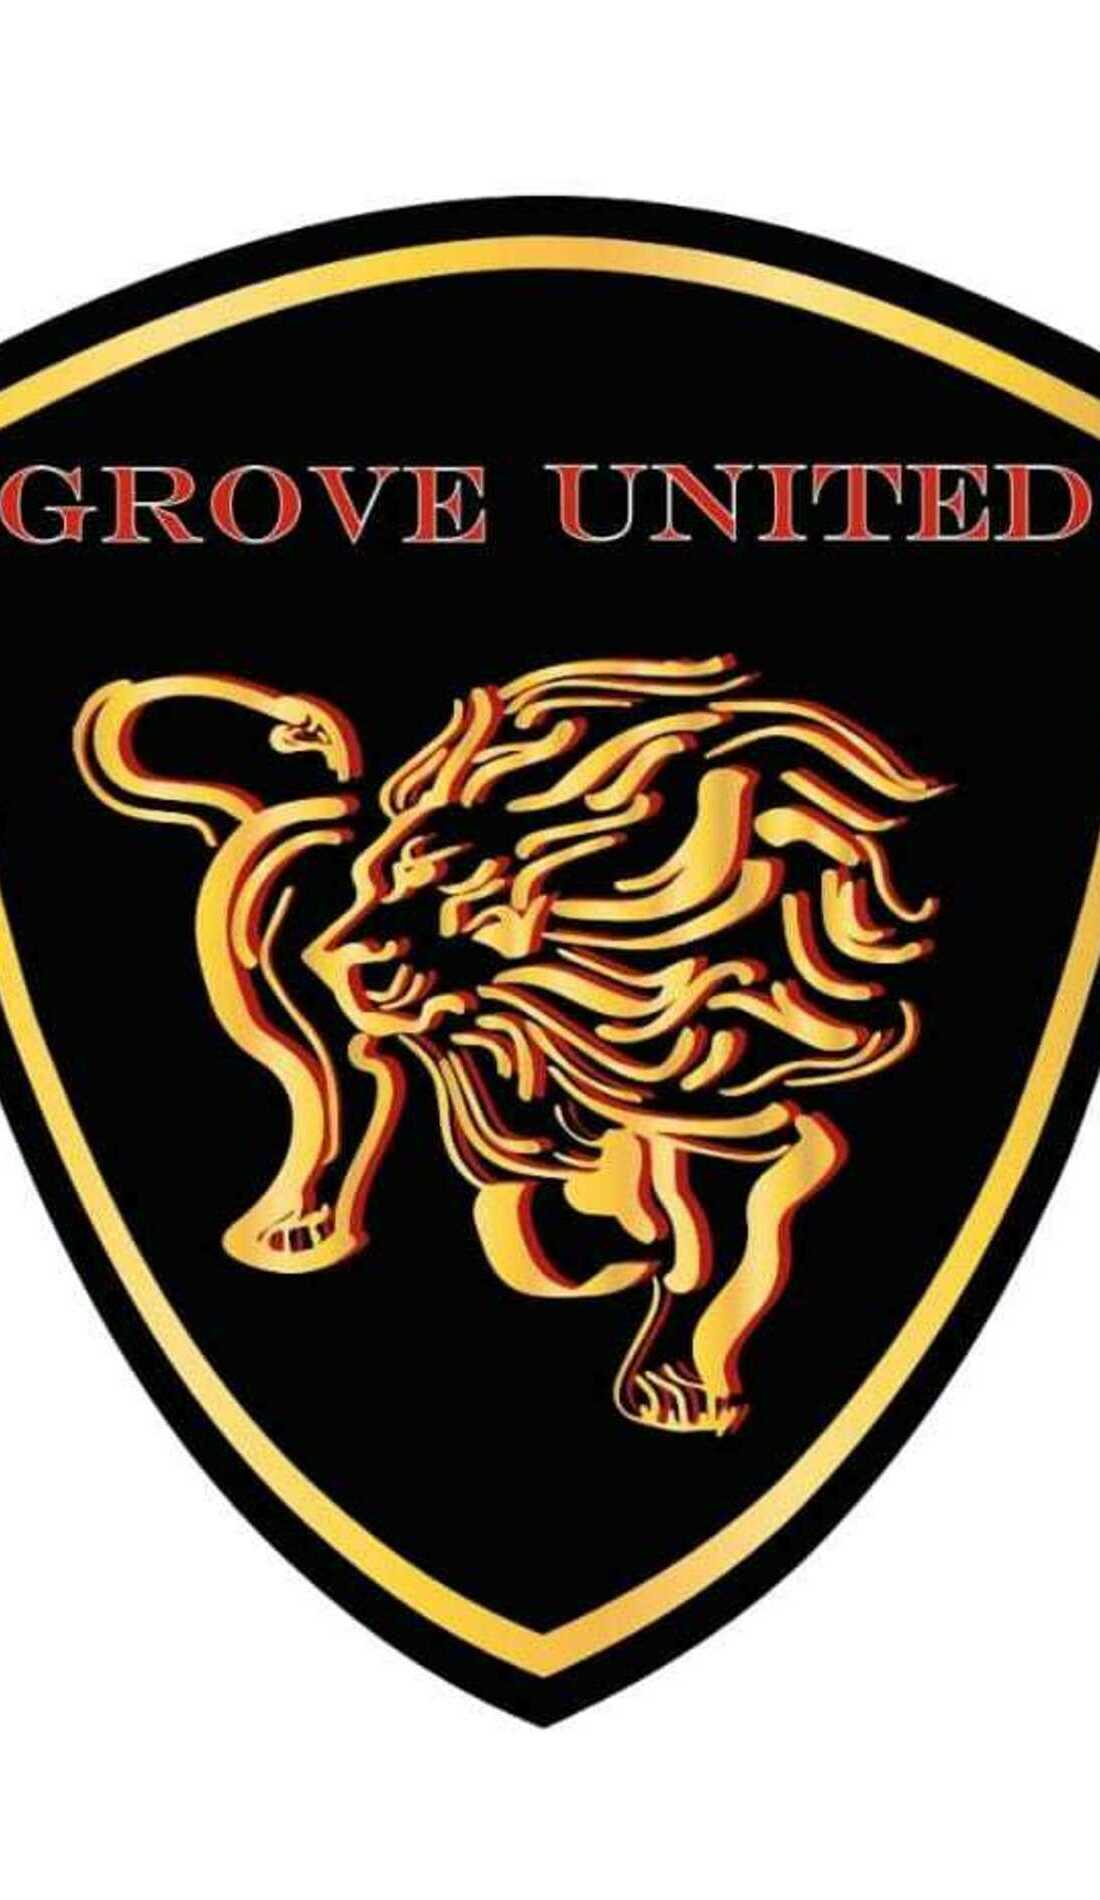 A Grove United live event